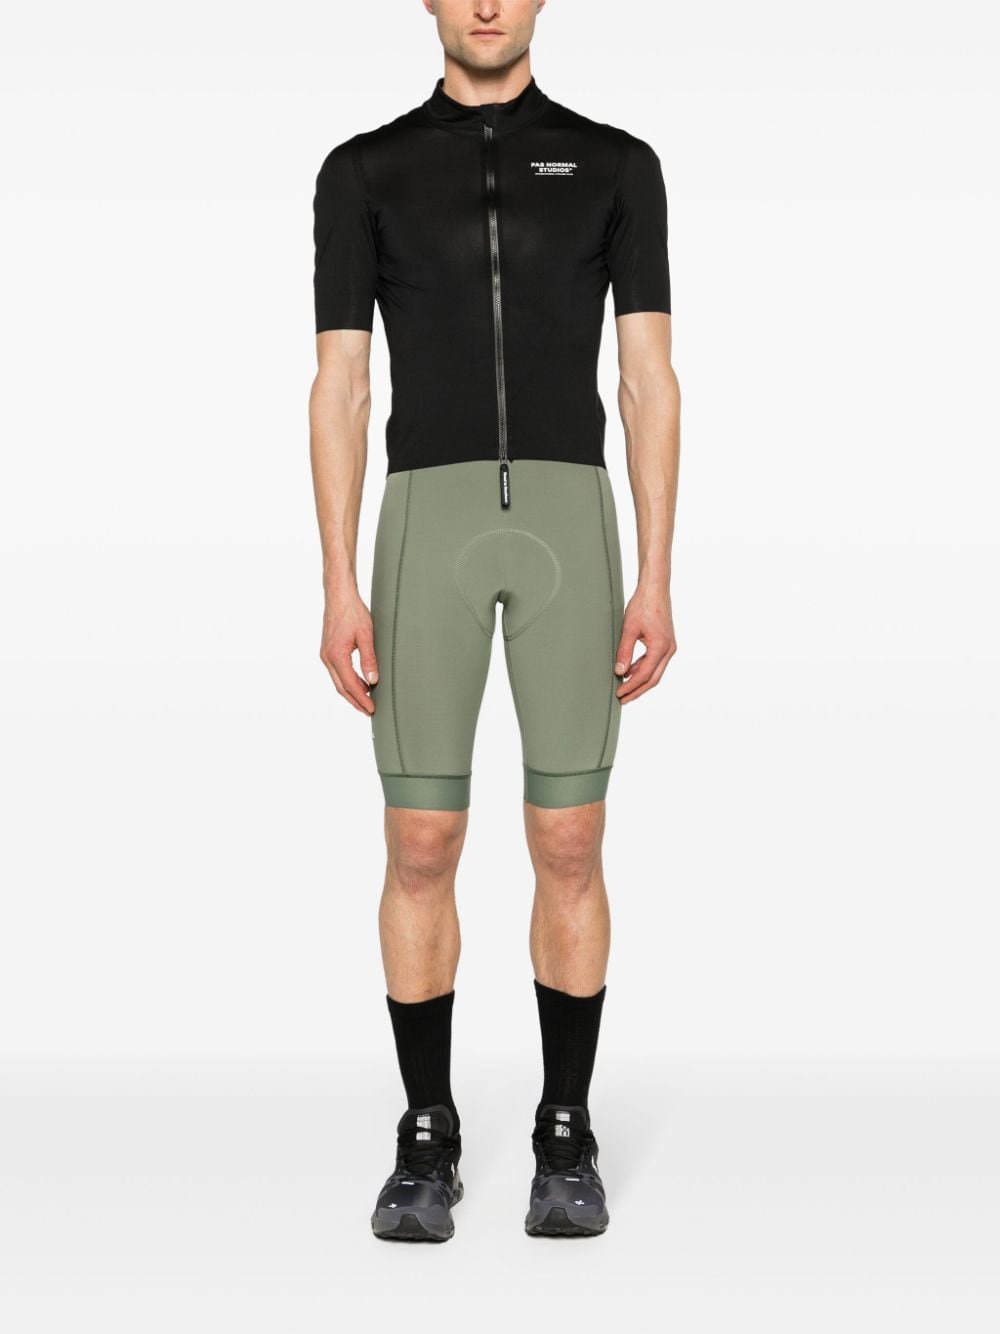 Shop Pas Normal Studios Essential Thermal Bibs Cycling Shorts In 绿色